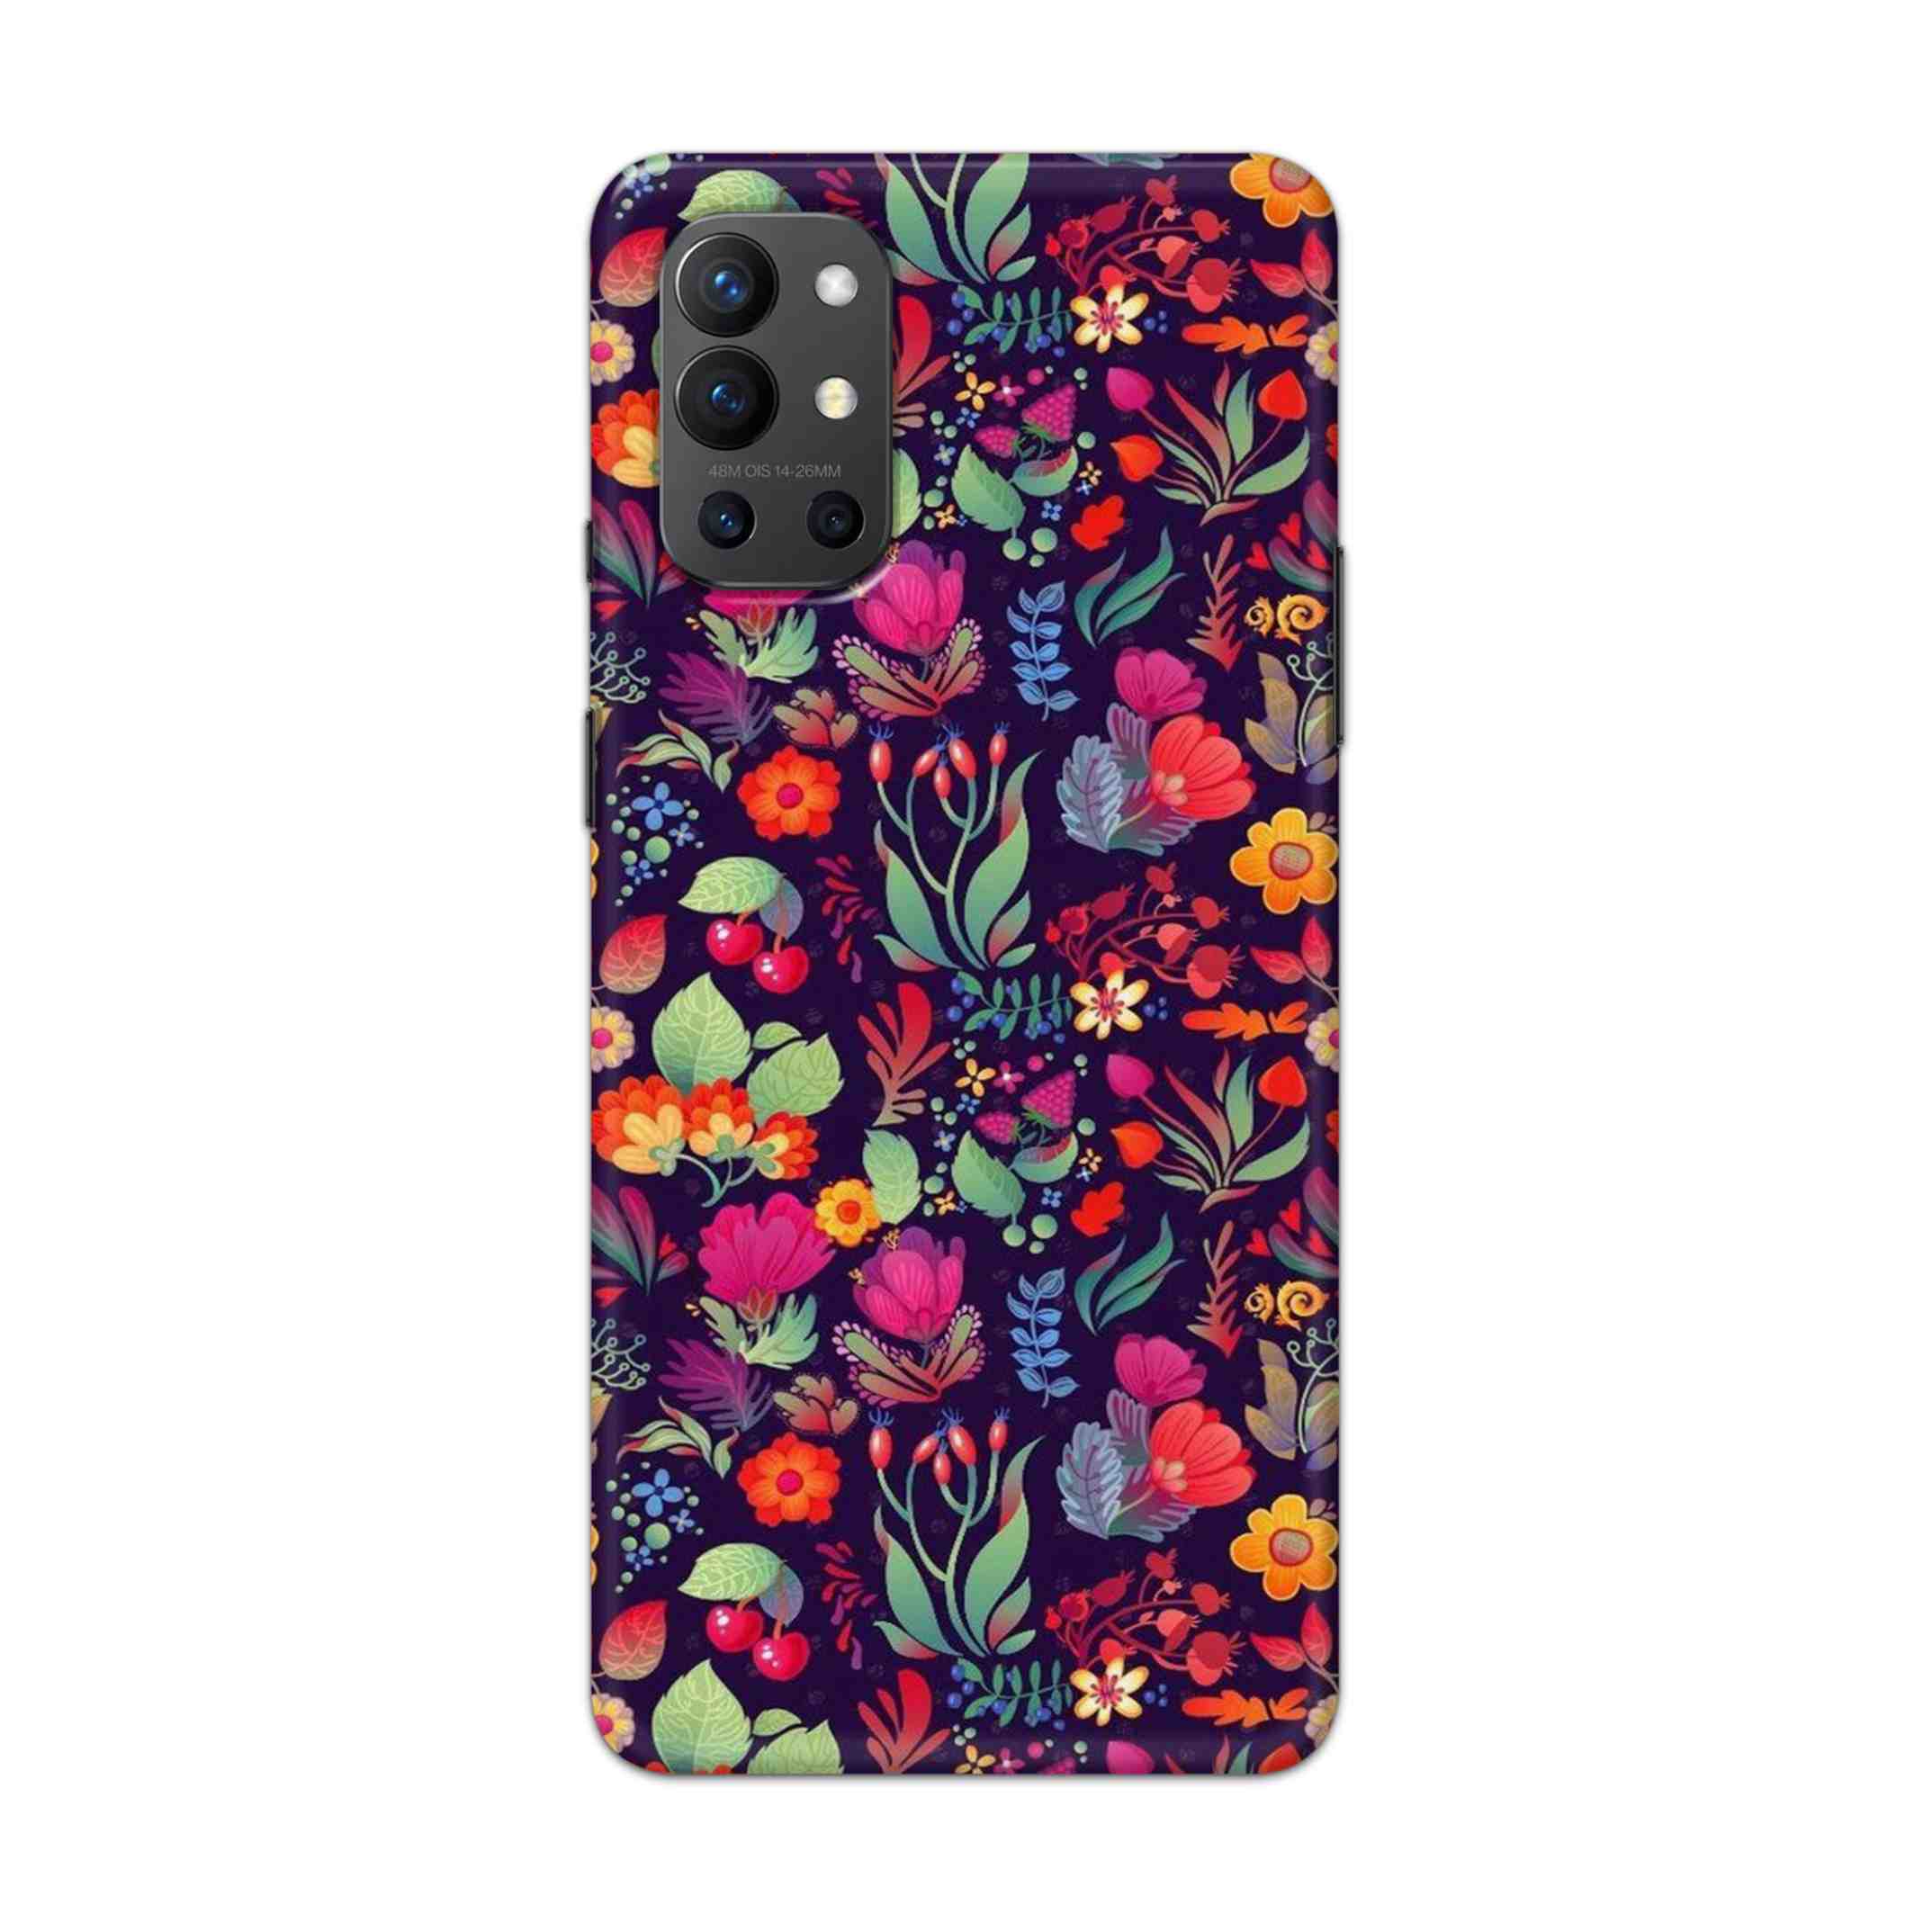 Buy Fruits Flower Hard Back Mobile Phone Case Cover For OnePlus 9R / 8T Online